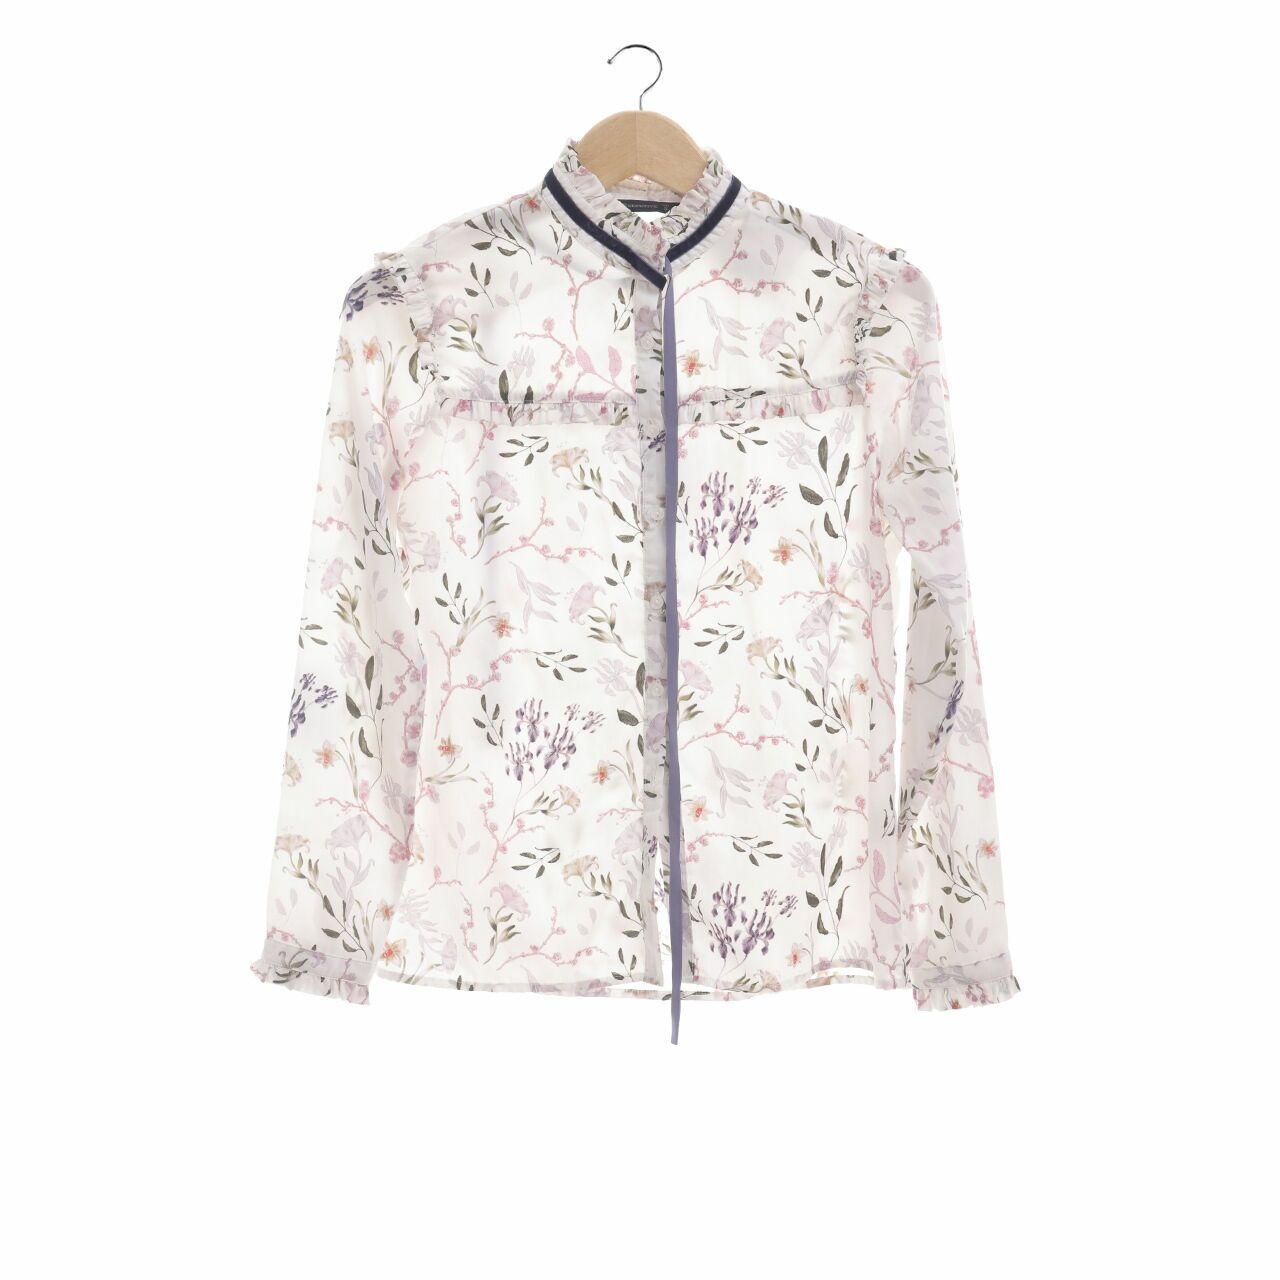 The Executive White Floral Blouse